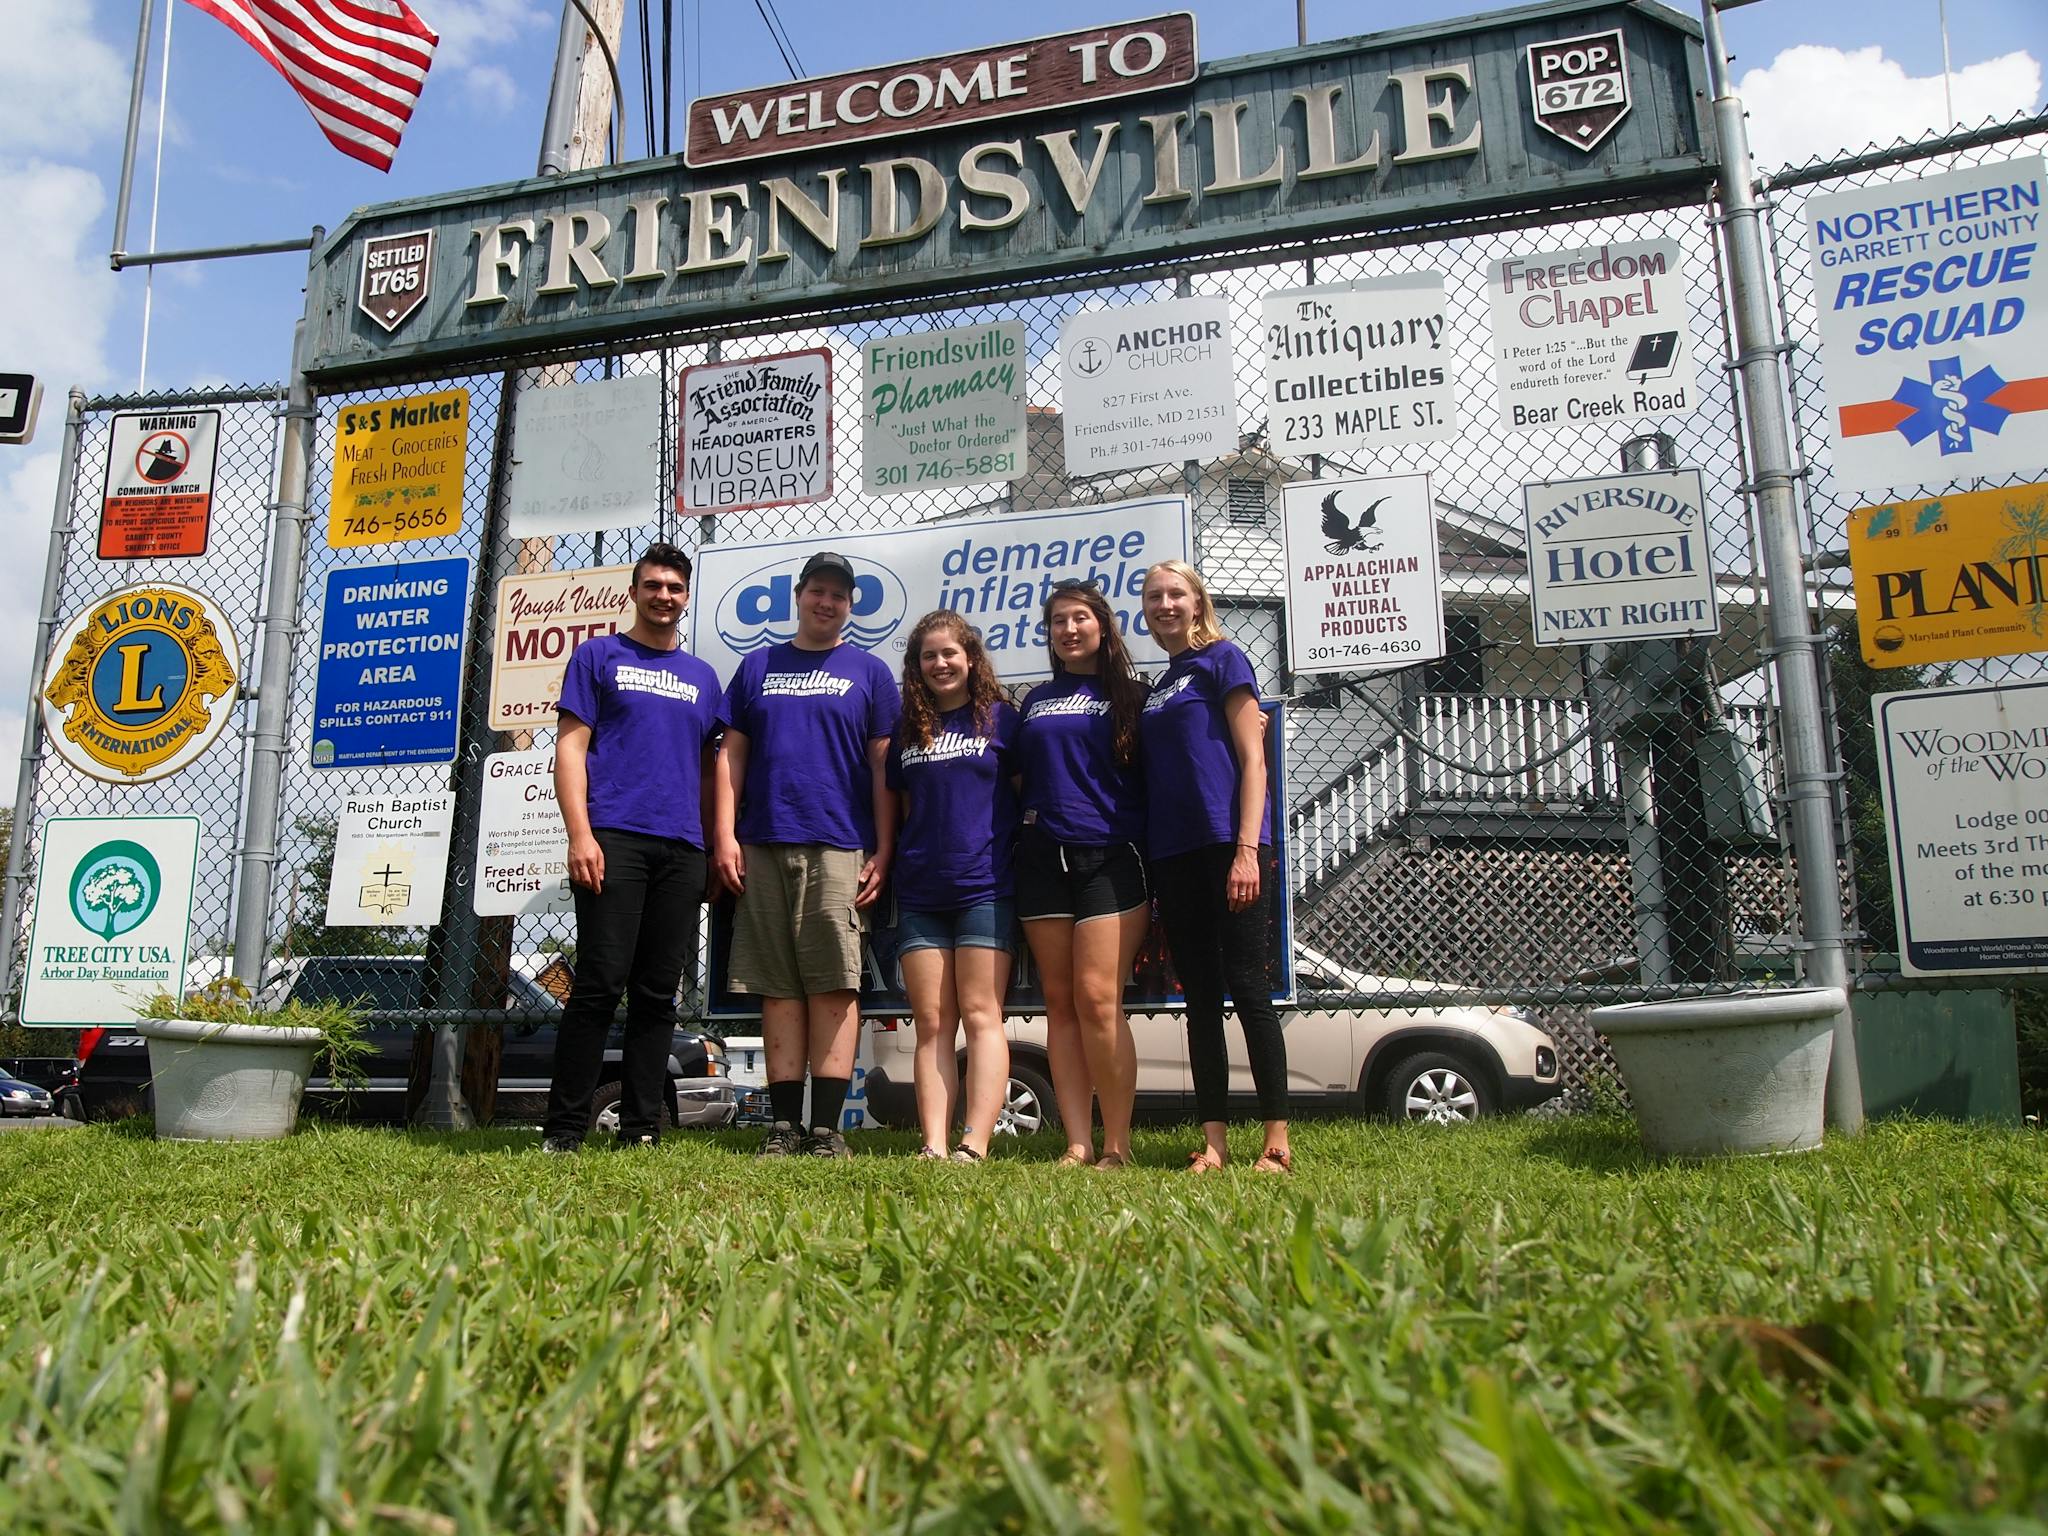 Group photo in front of a sign that reads FRIENDSVILLE in Friendsville, Virginia